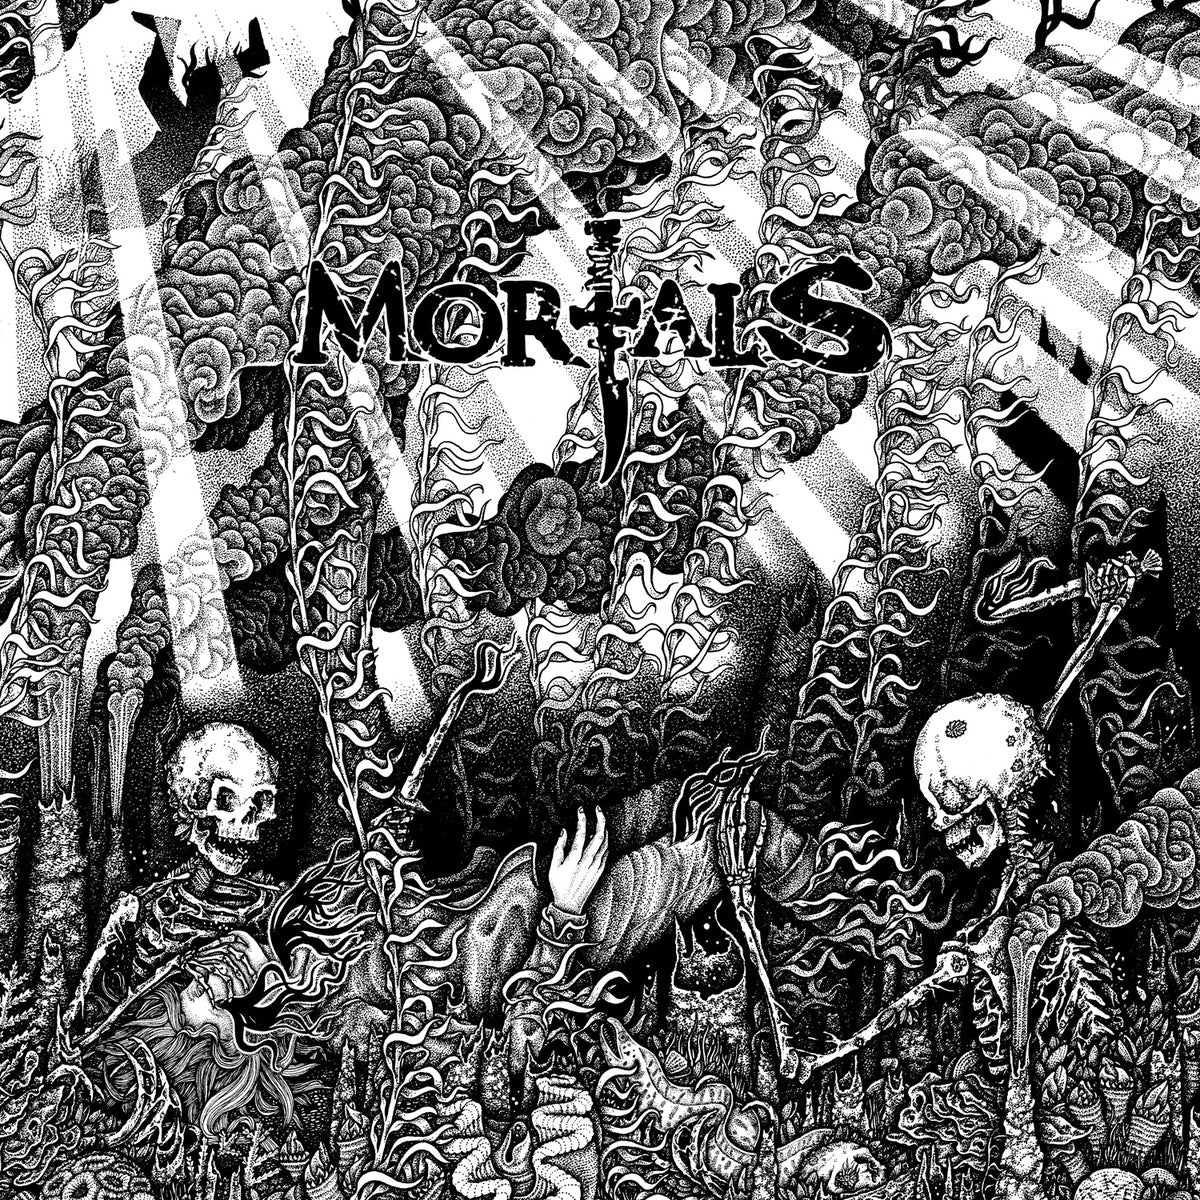 Mortals - Cursed To See The Future